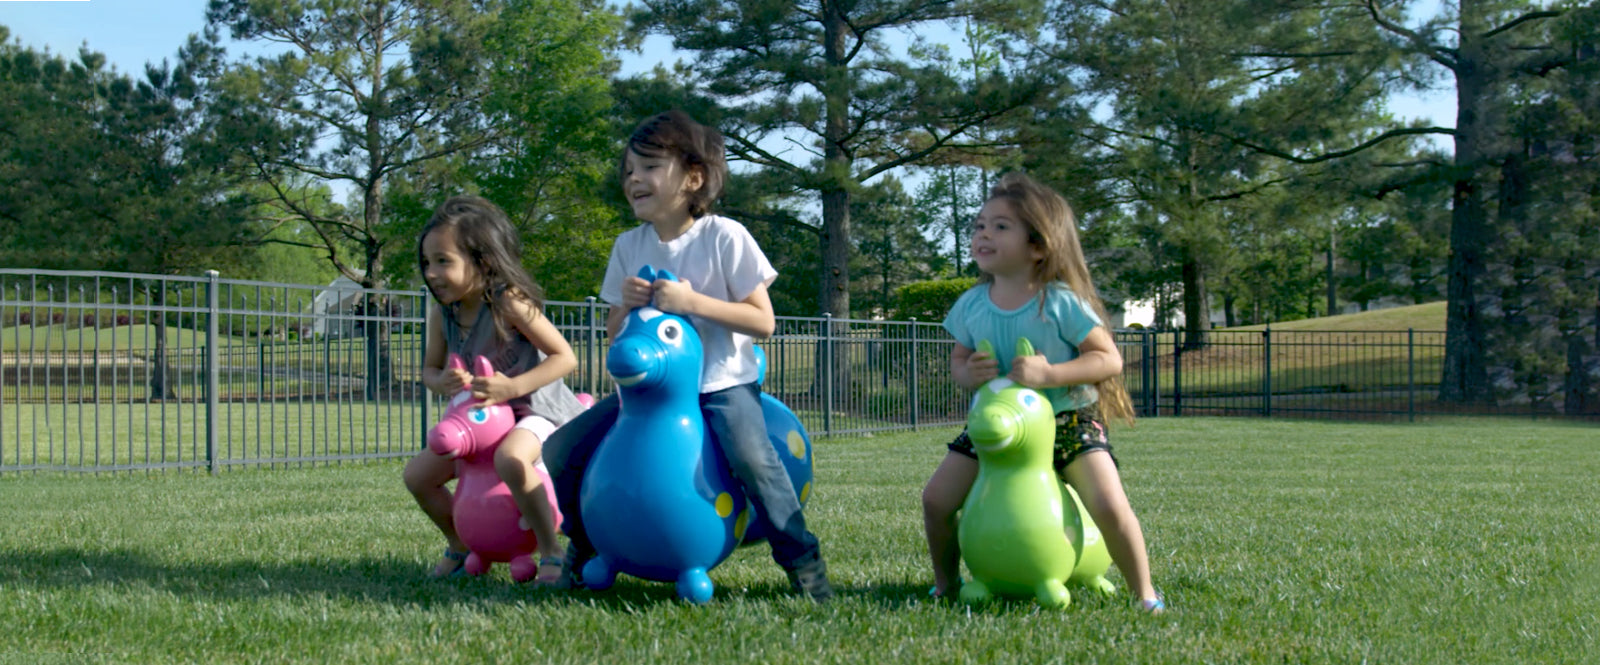 Children play on Rody Bounce Toys